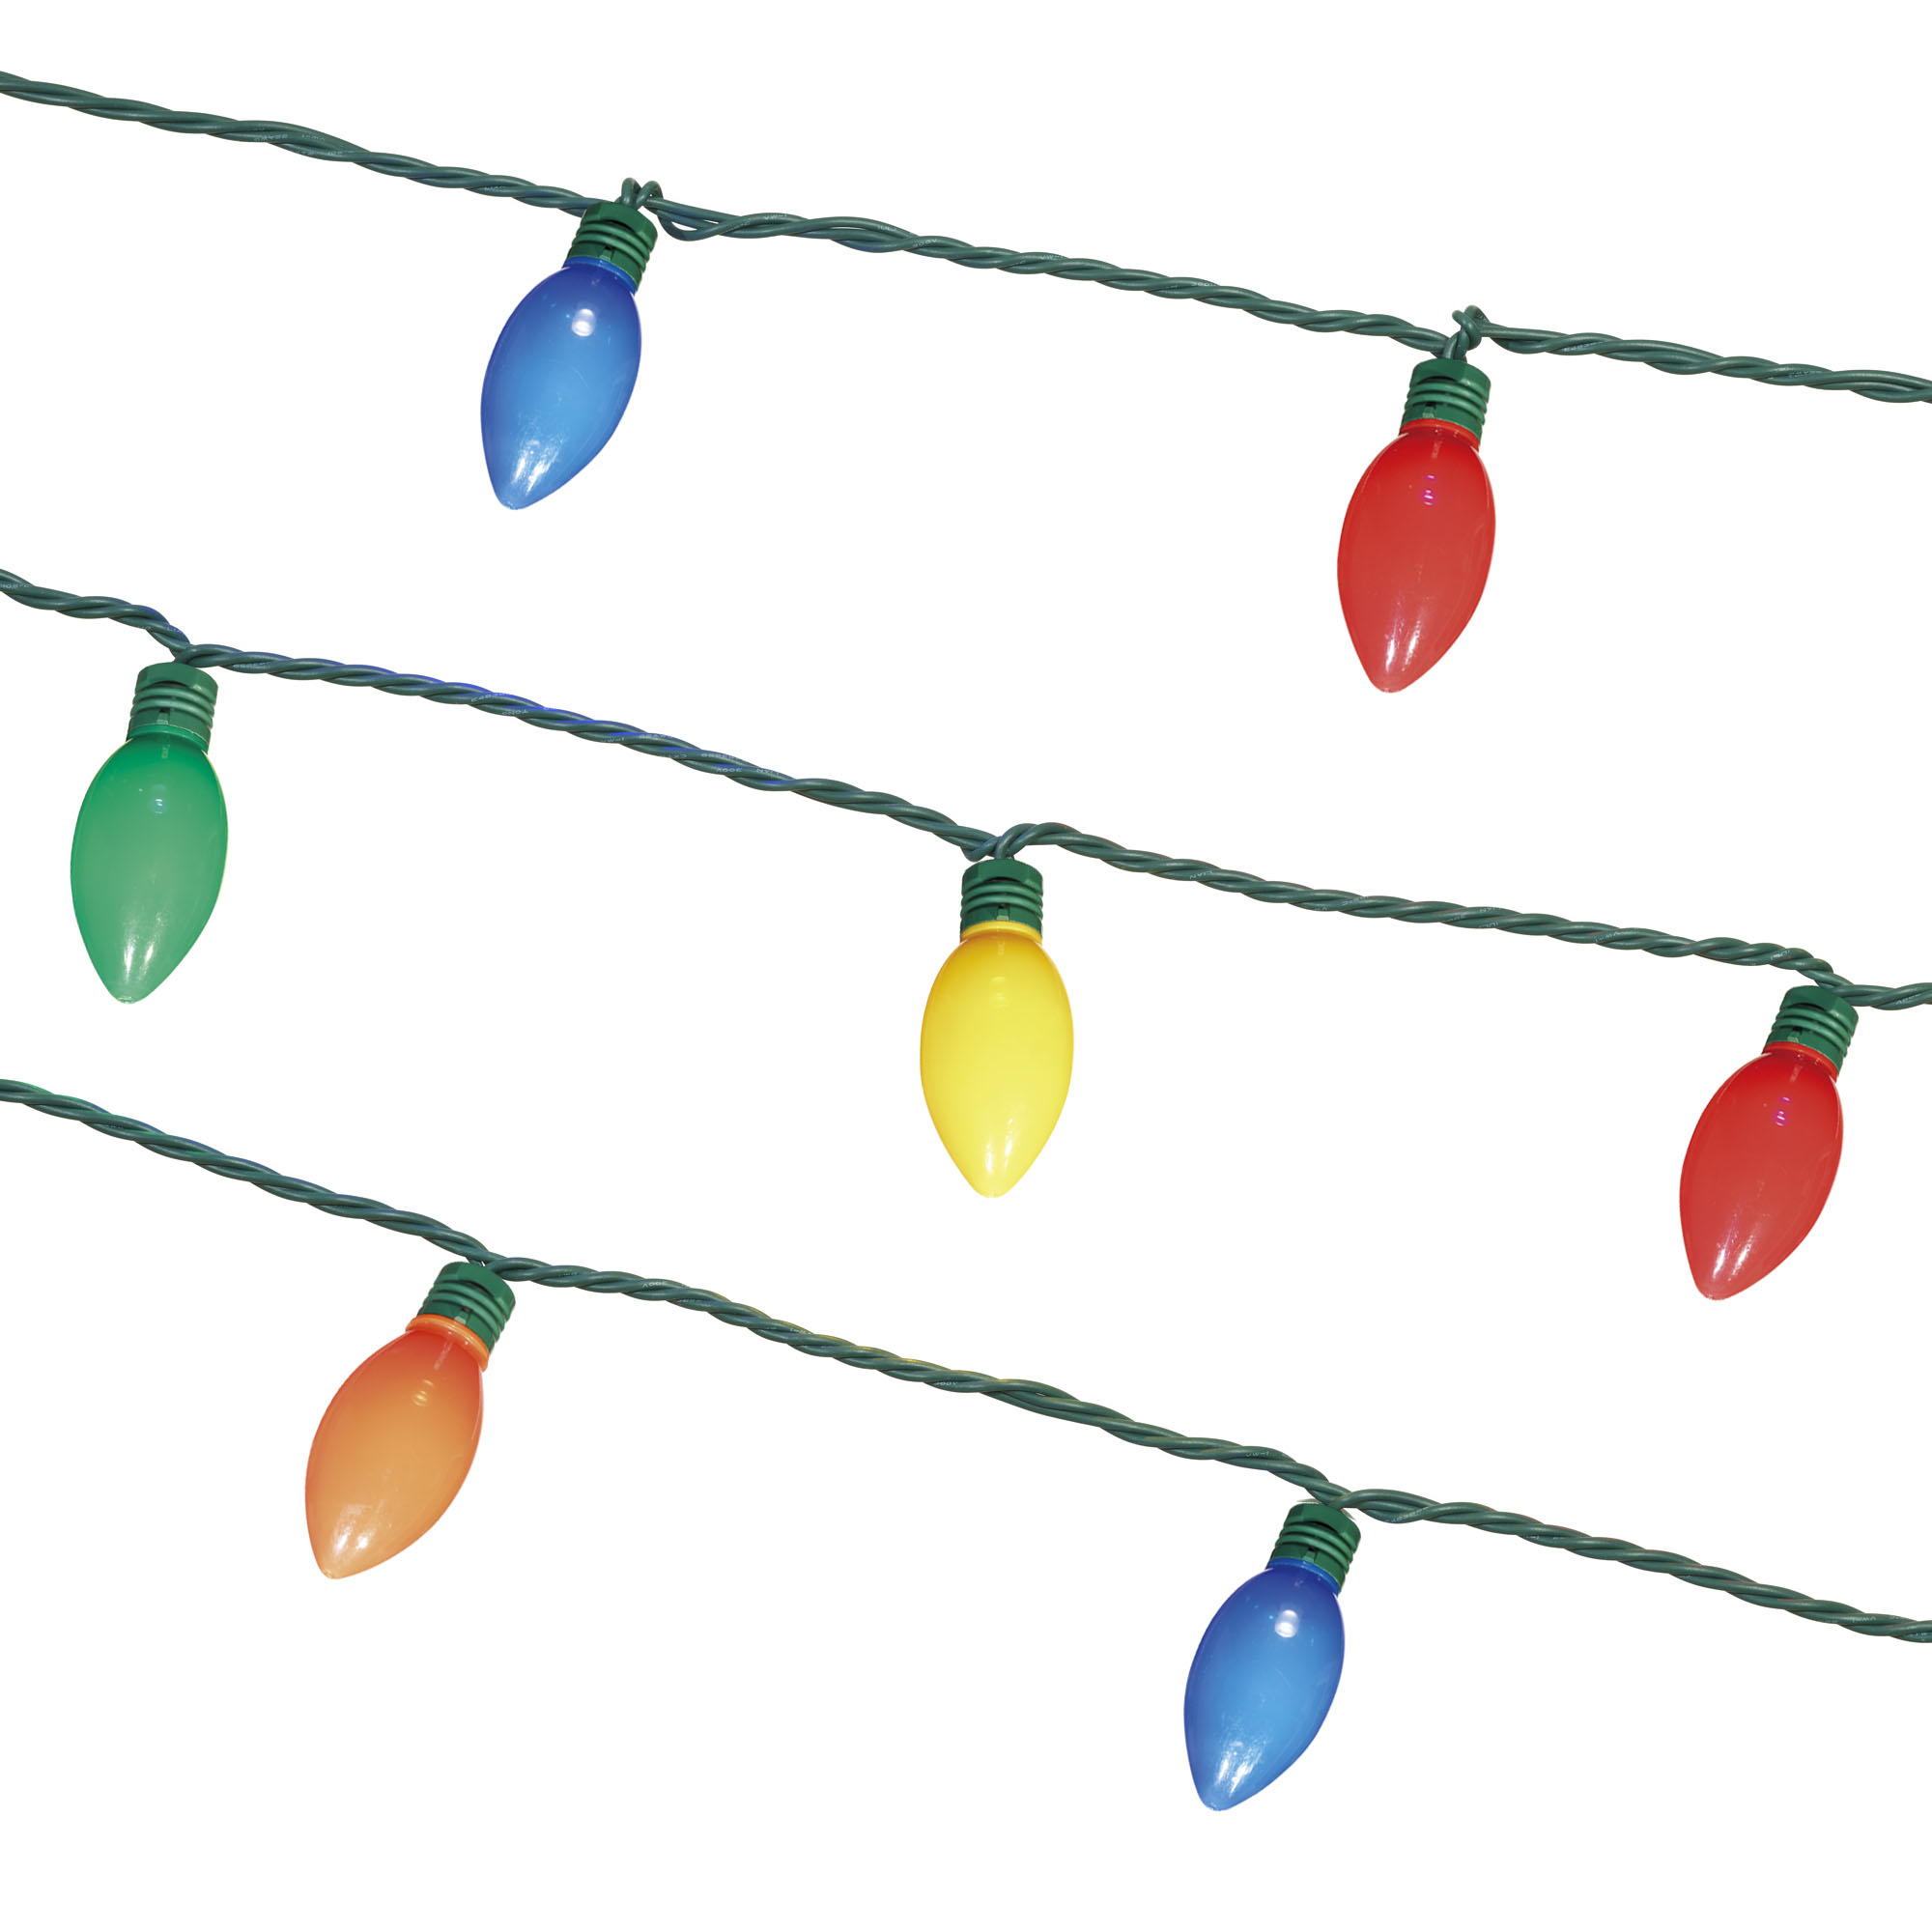 Holiday Time 100-Count Ceramic Multicolor LED C9 Christmas Lights, with Green Wire, 60 feet - image 4 of 4